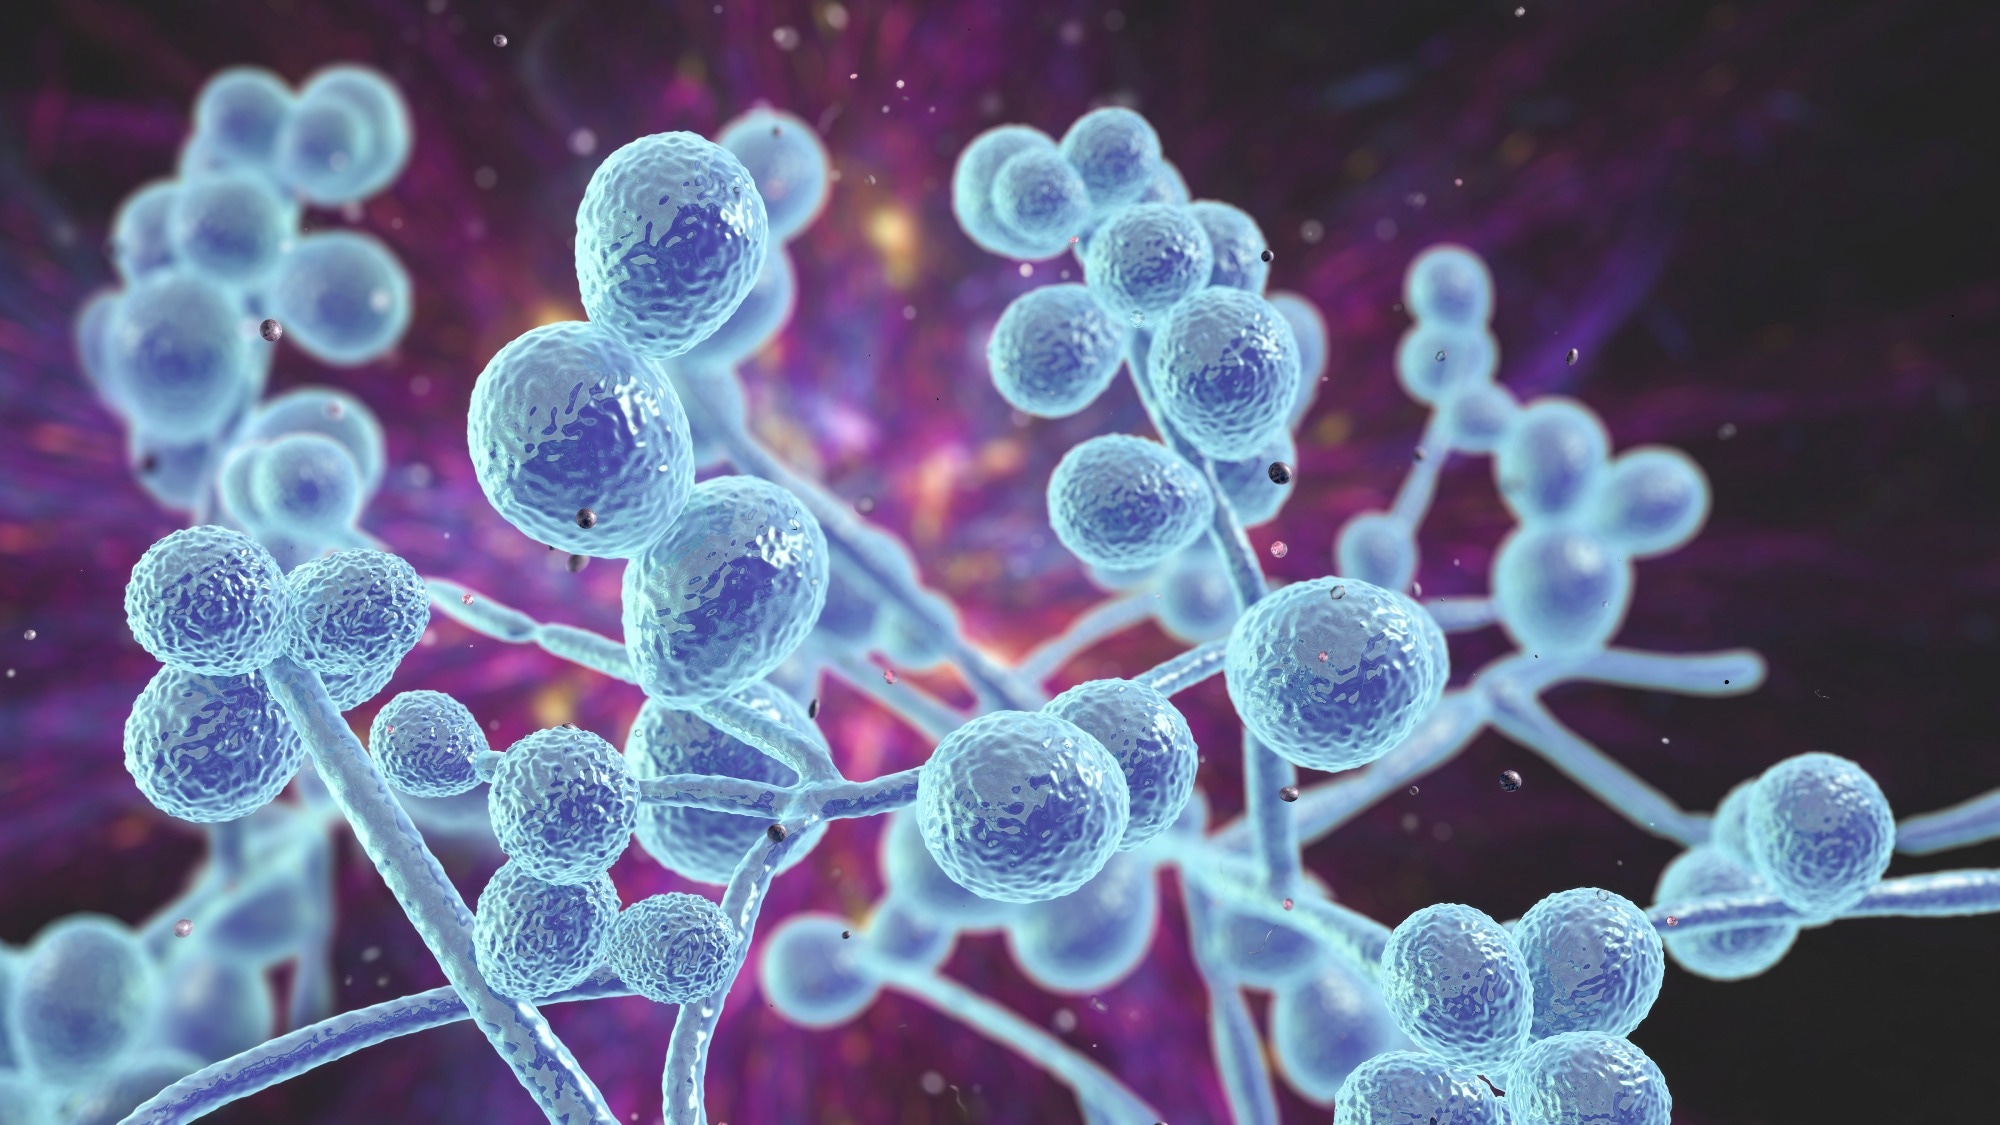 Study: The Emergence and Persistence of Candida auris in Western New York with no Epidemiologic Links: A Failure of Stewardship?. Image Credit: Kateryna Kon / Shutterstock